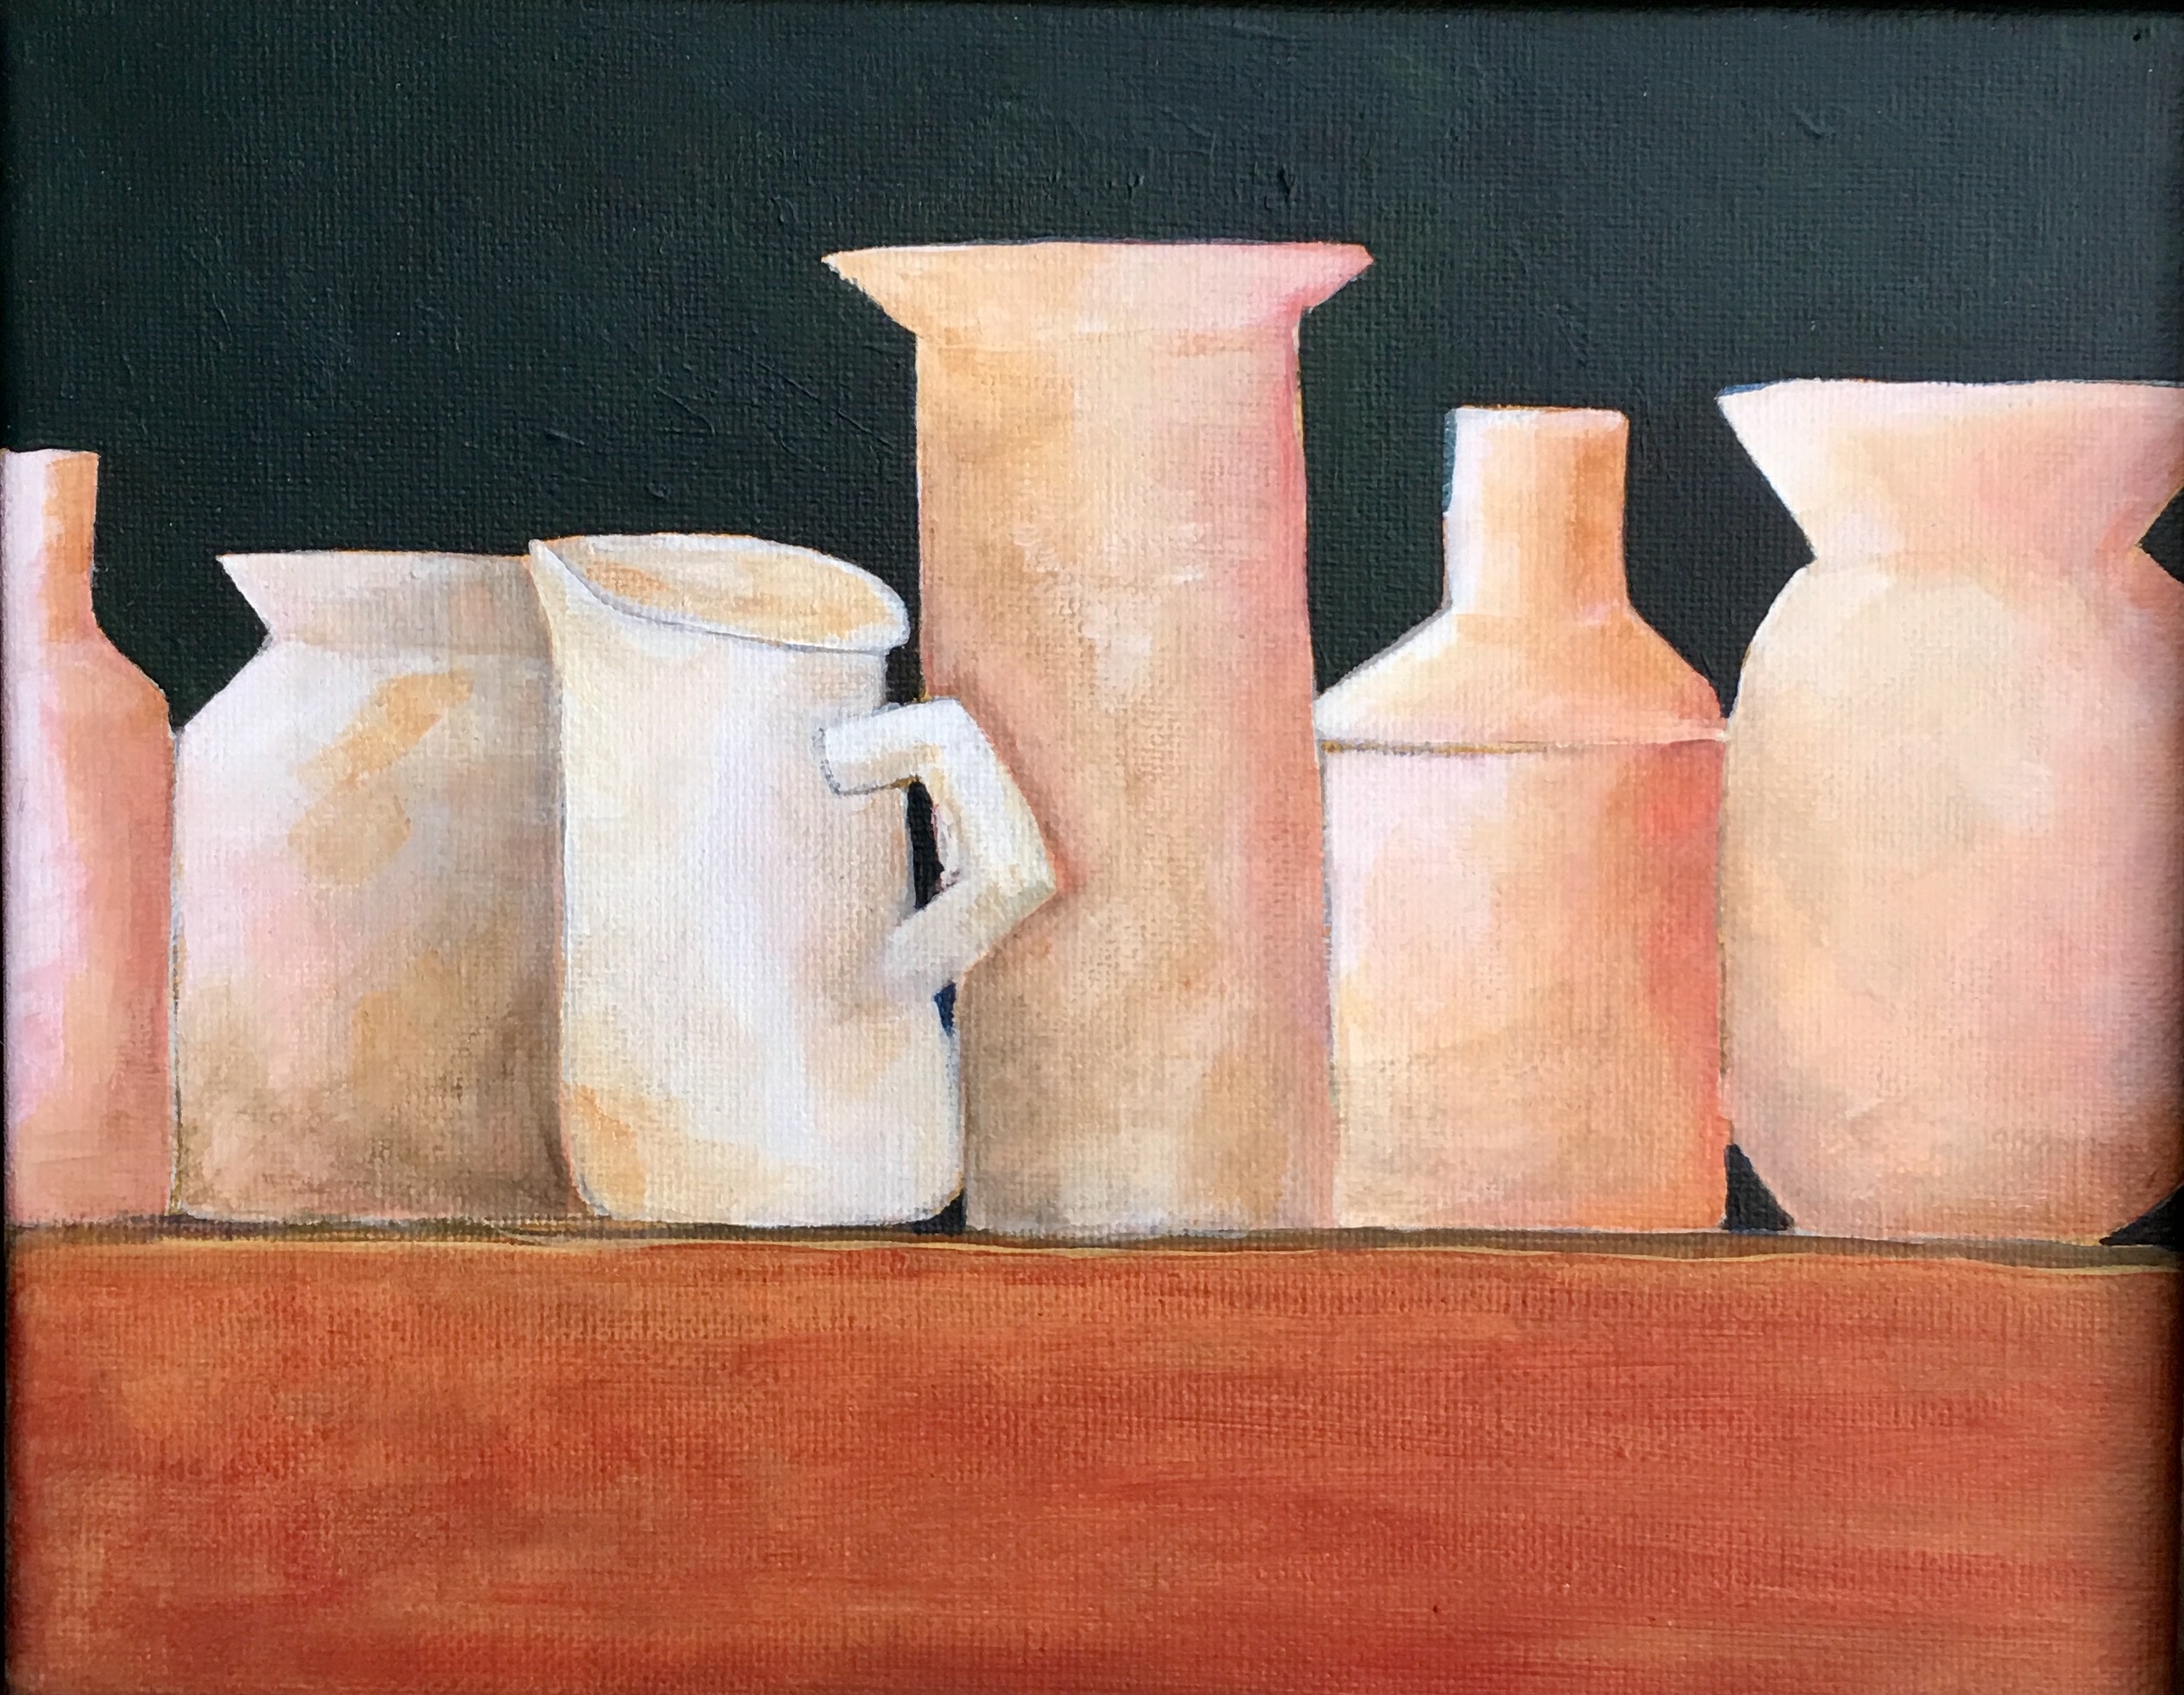 A painting of several vases on a table.